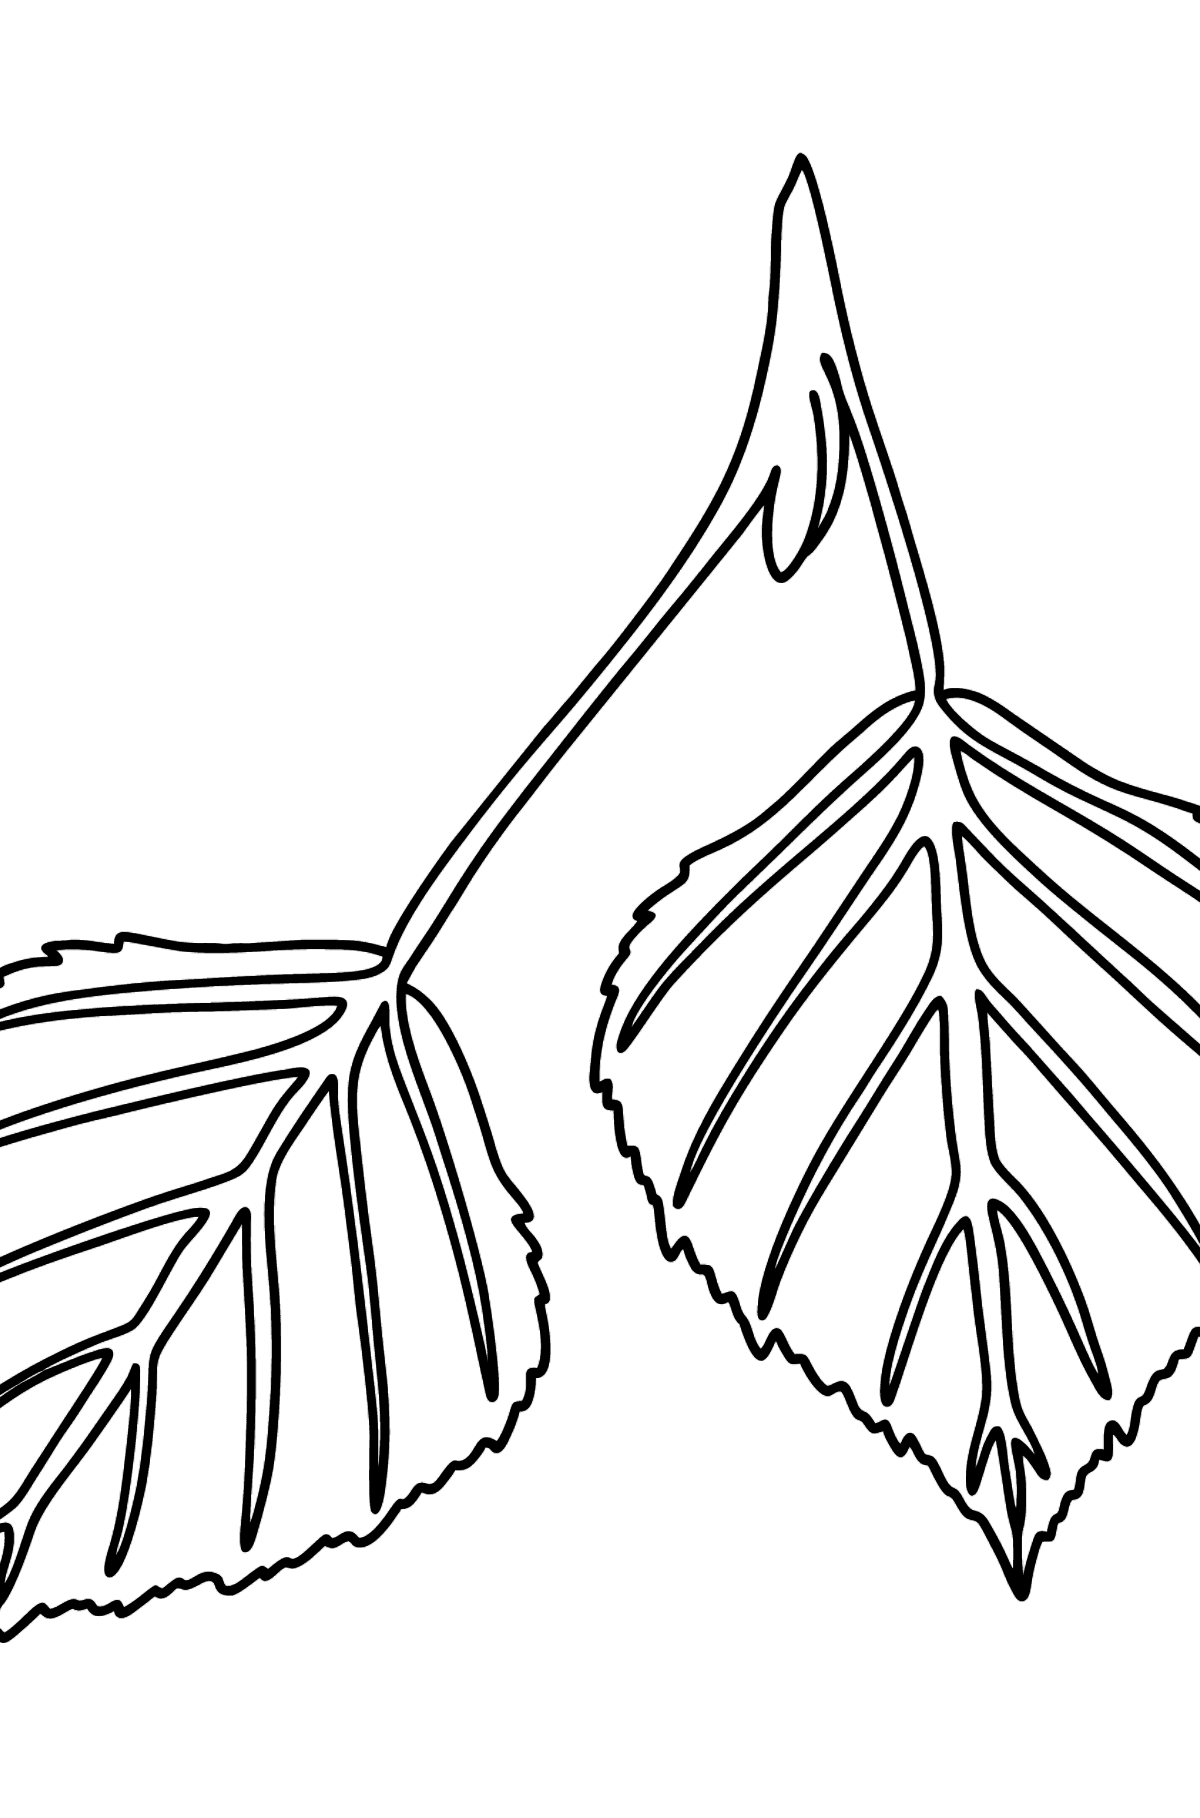 Birch Leaves coloring page - Coloring Pages for Kids